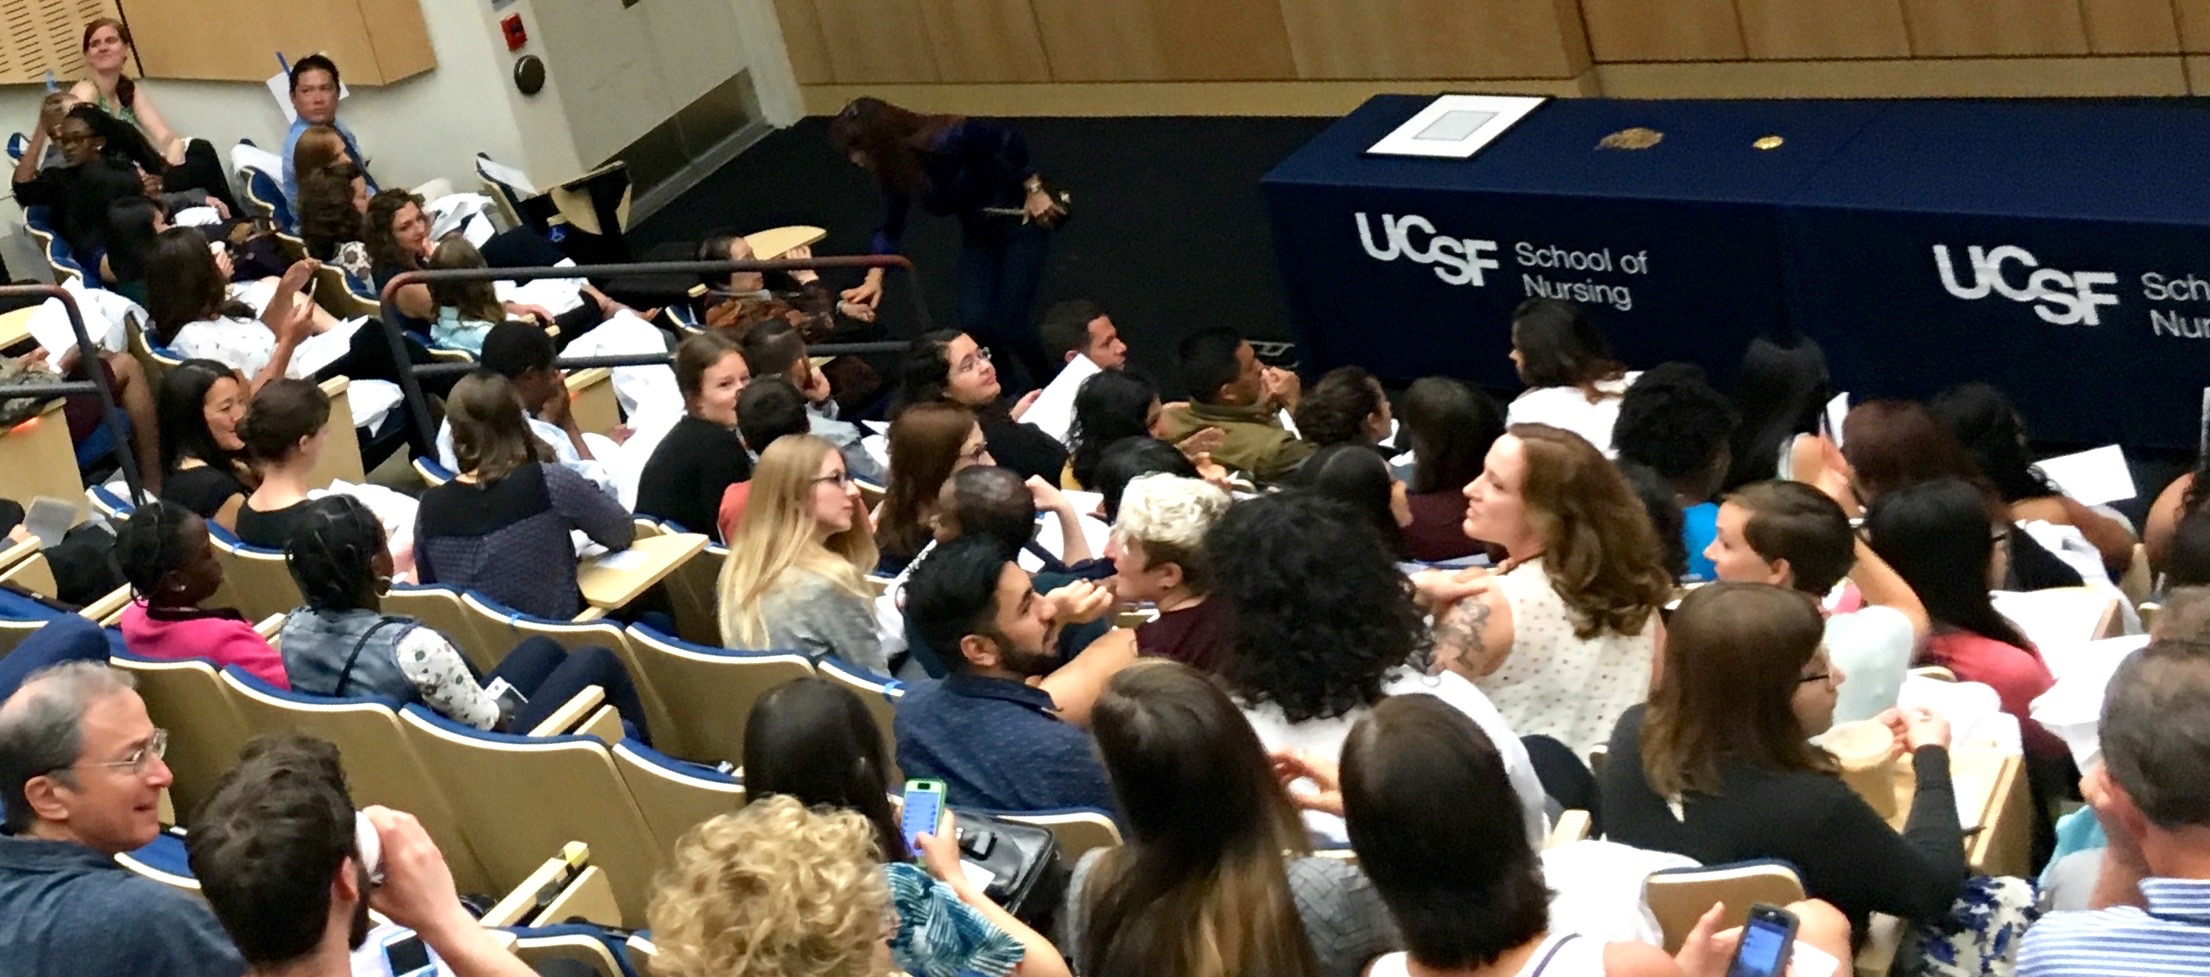 Audience gathers for start of MEPN White Coat Ceremony in UCSF's Cole Hall.